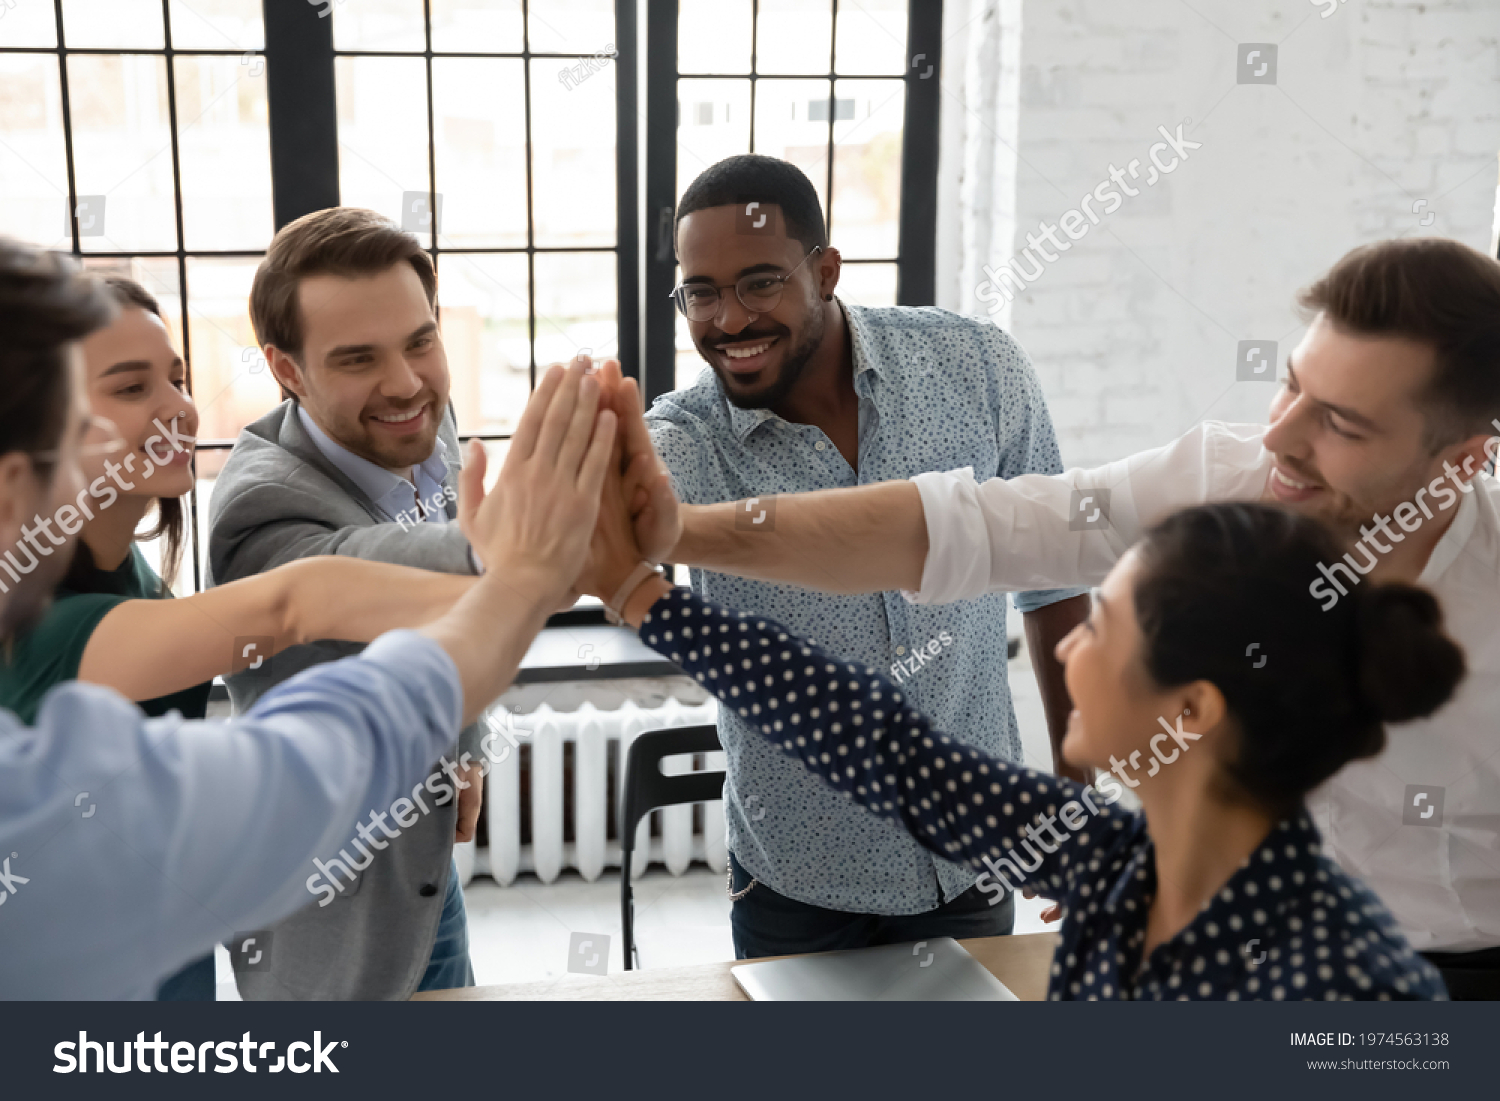 Excited millennial teammates joining hands for giving high fives. Team of happy employees celebrating corporate goal achievement, successful project accomplishment, shared success. Teamwork concept #1974563138